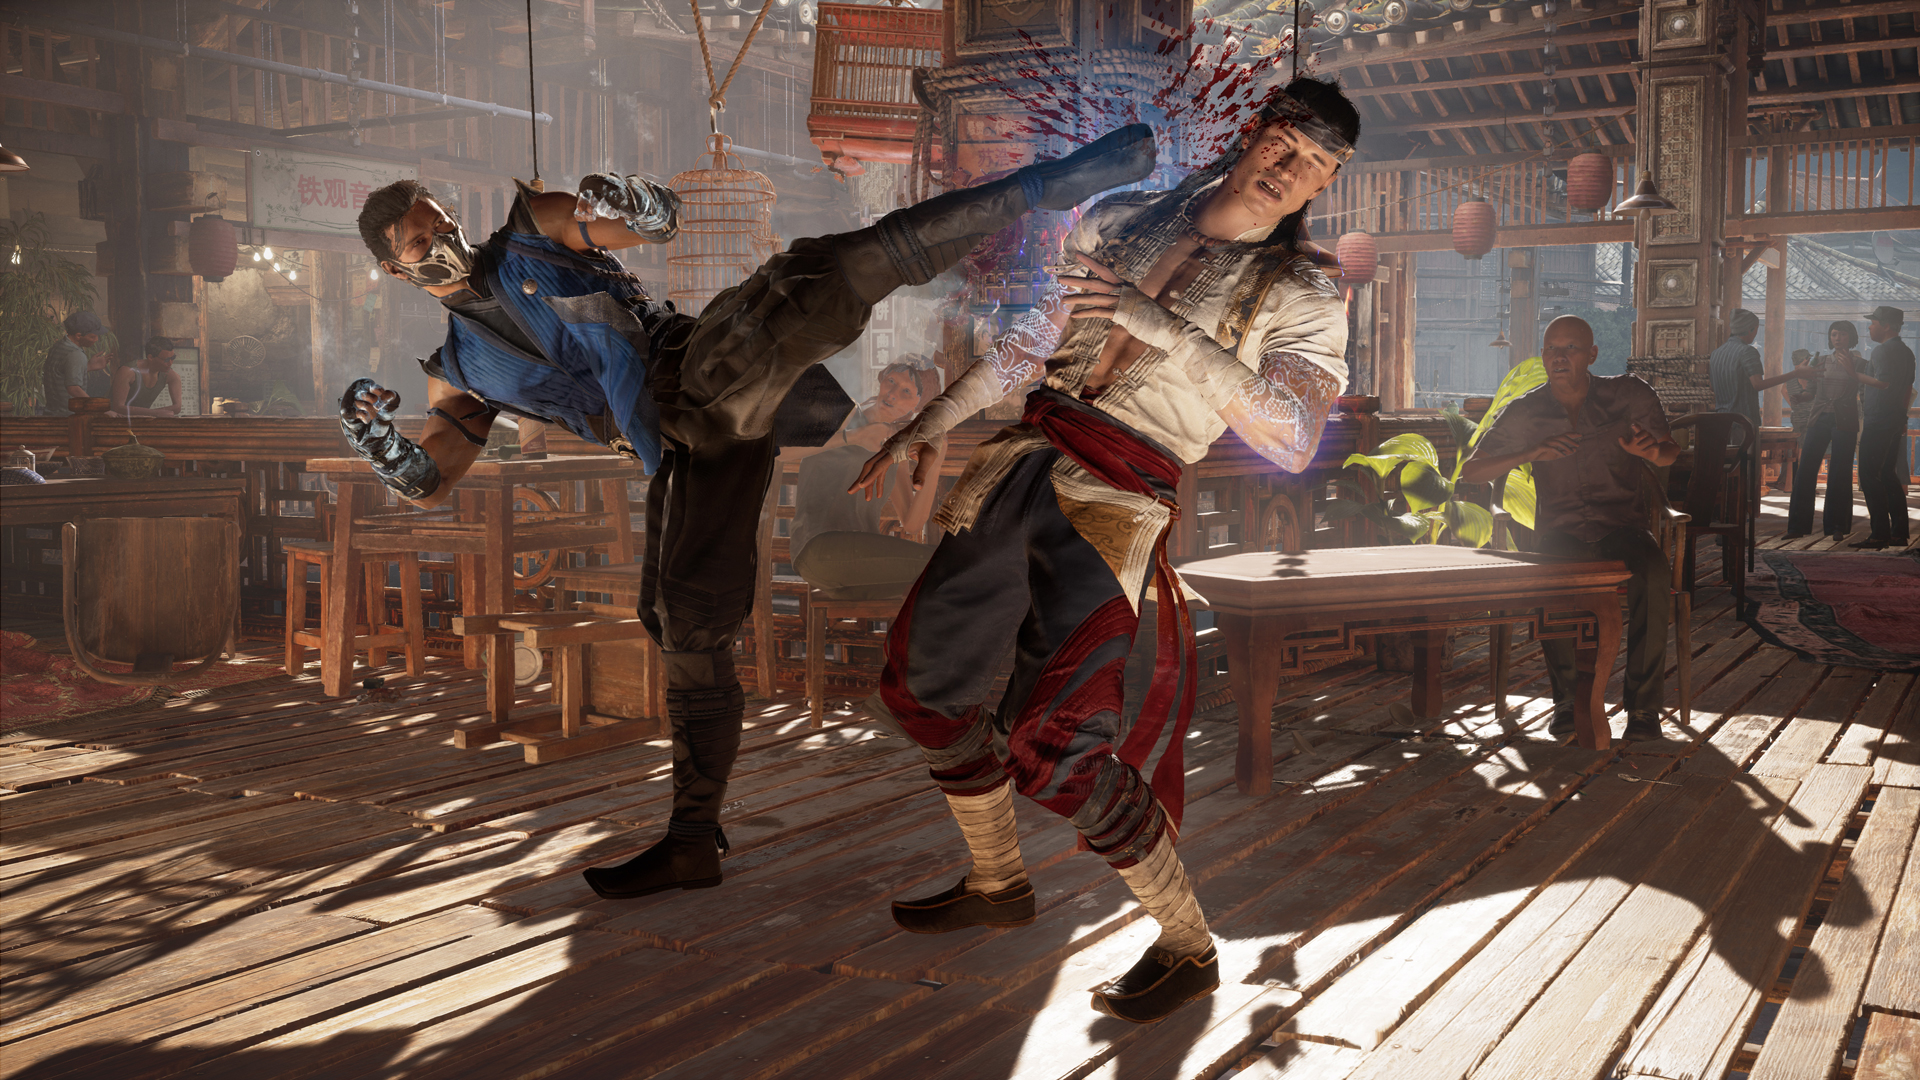 Mortal Kombat 1 Will Feature a Minigame About Destroying a Decapitated Head